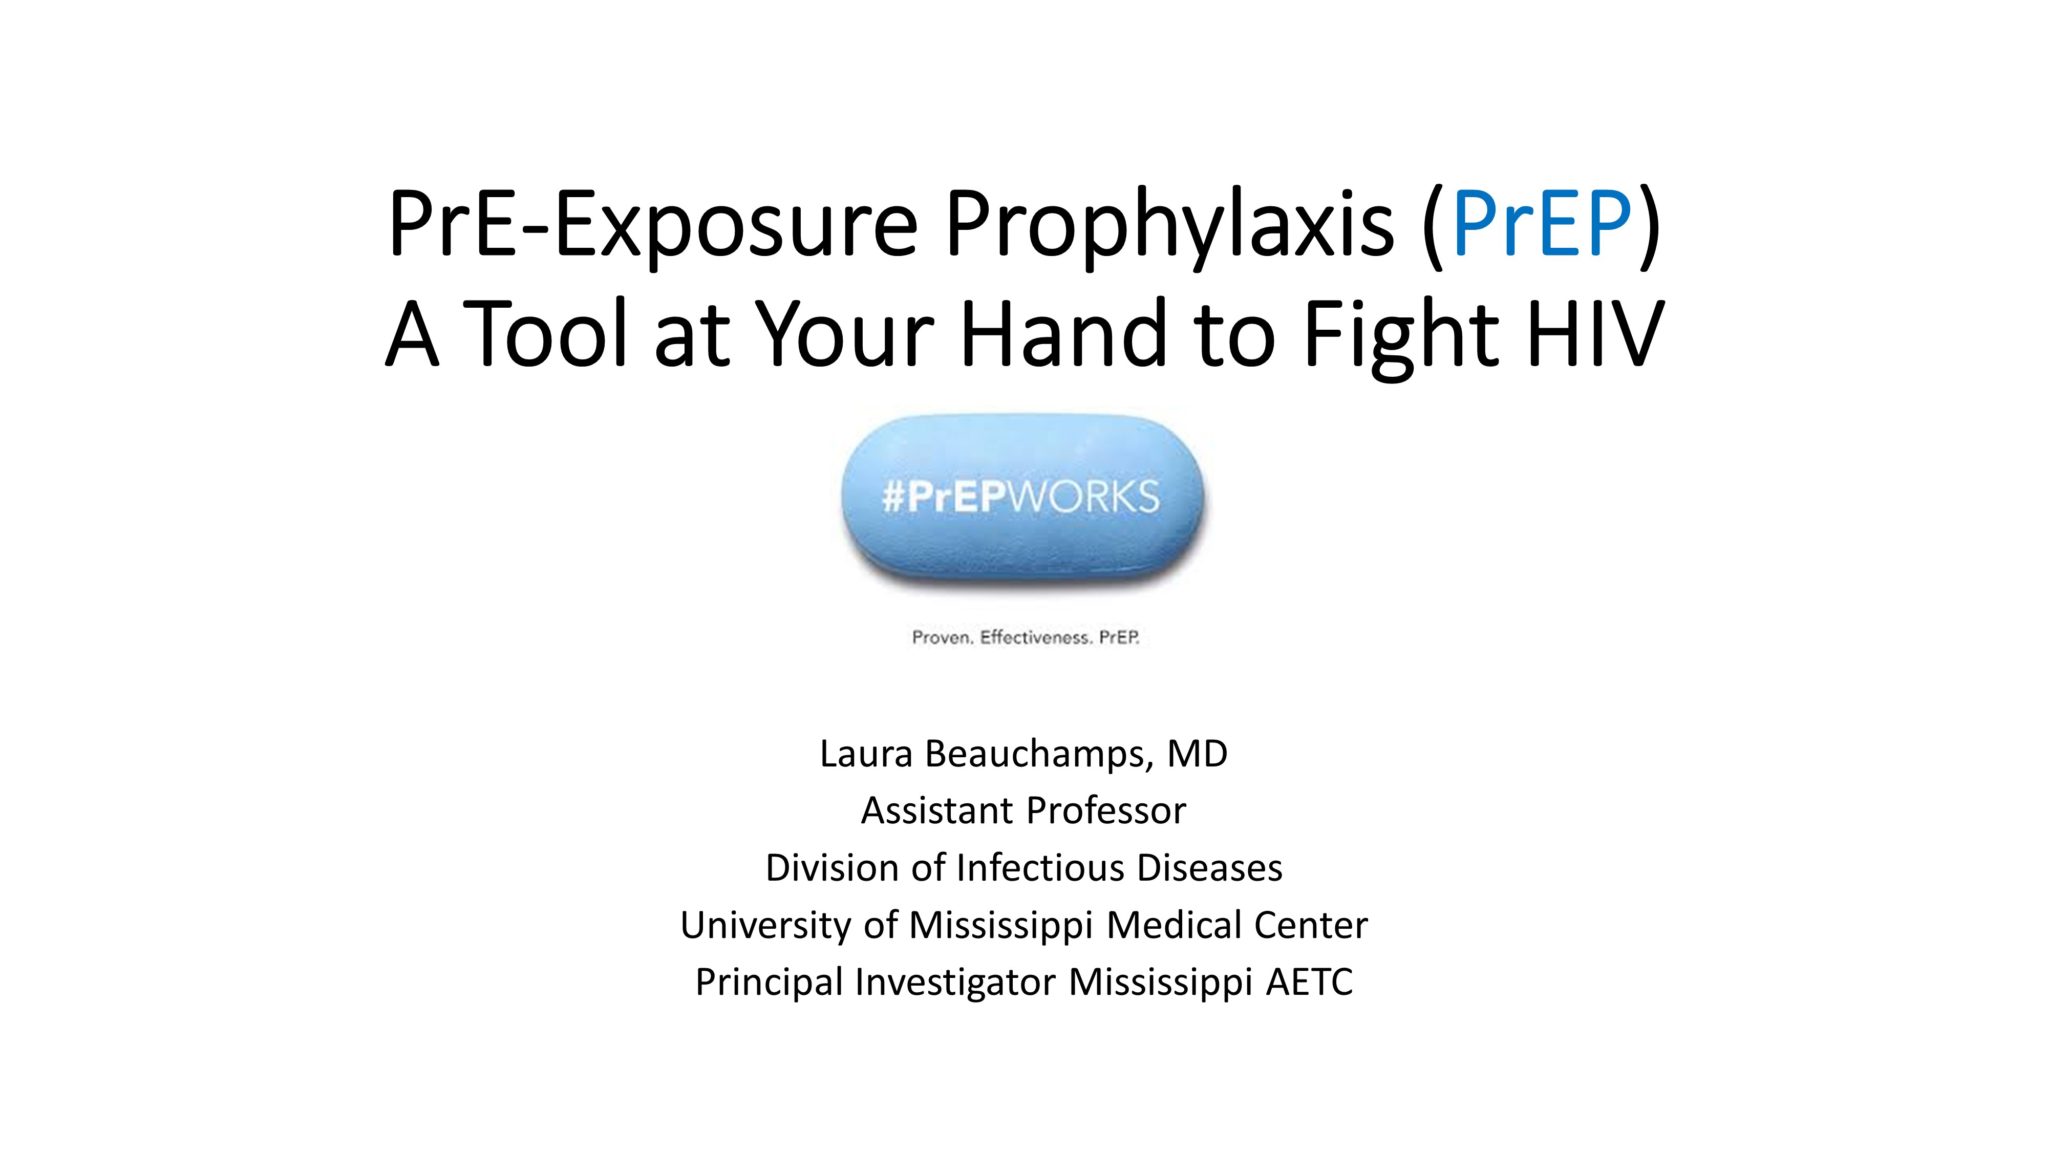 PrE-Exposure Prophylaxis (PrEP): A Tool at Your Hand to Fight HIV